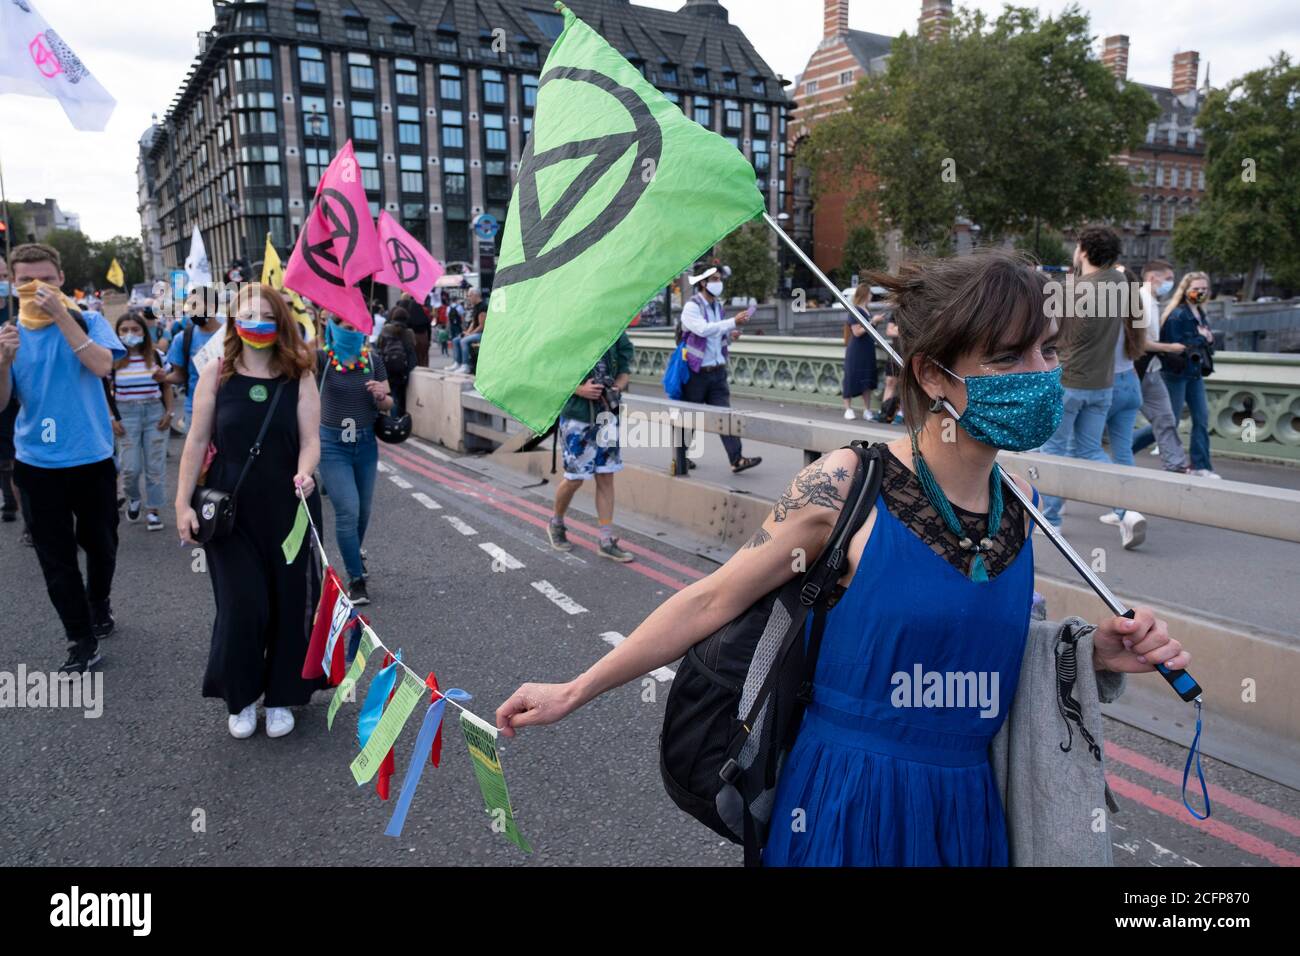 Extinction Rebellion activists at the Marine Rebellion march on 6th September 2020 in London, United Kingdom. Ocean Rebellion, Sea Life Extinction, Animal Rebellion and Extinction Rebellion joined together to celebrate the biodiversity found in our seas, and to grieve at the destruction of the Earth’s oceans and marine life due to climate breakdown and human interference, and the loss of lives, homes and livelihoods from rising sea levels. Extinction Rebellion is a climate change group started in 2018 and has gained a huge following of people committed to peaceful protests. These protests are Stock Photo